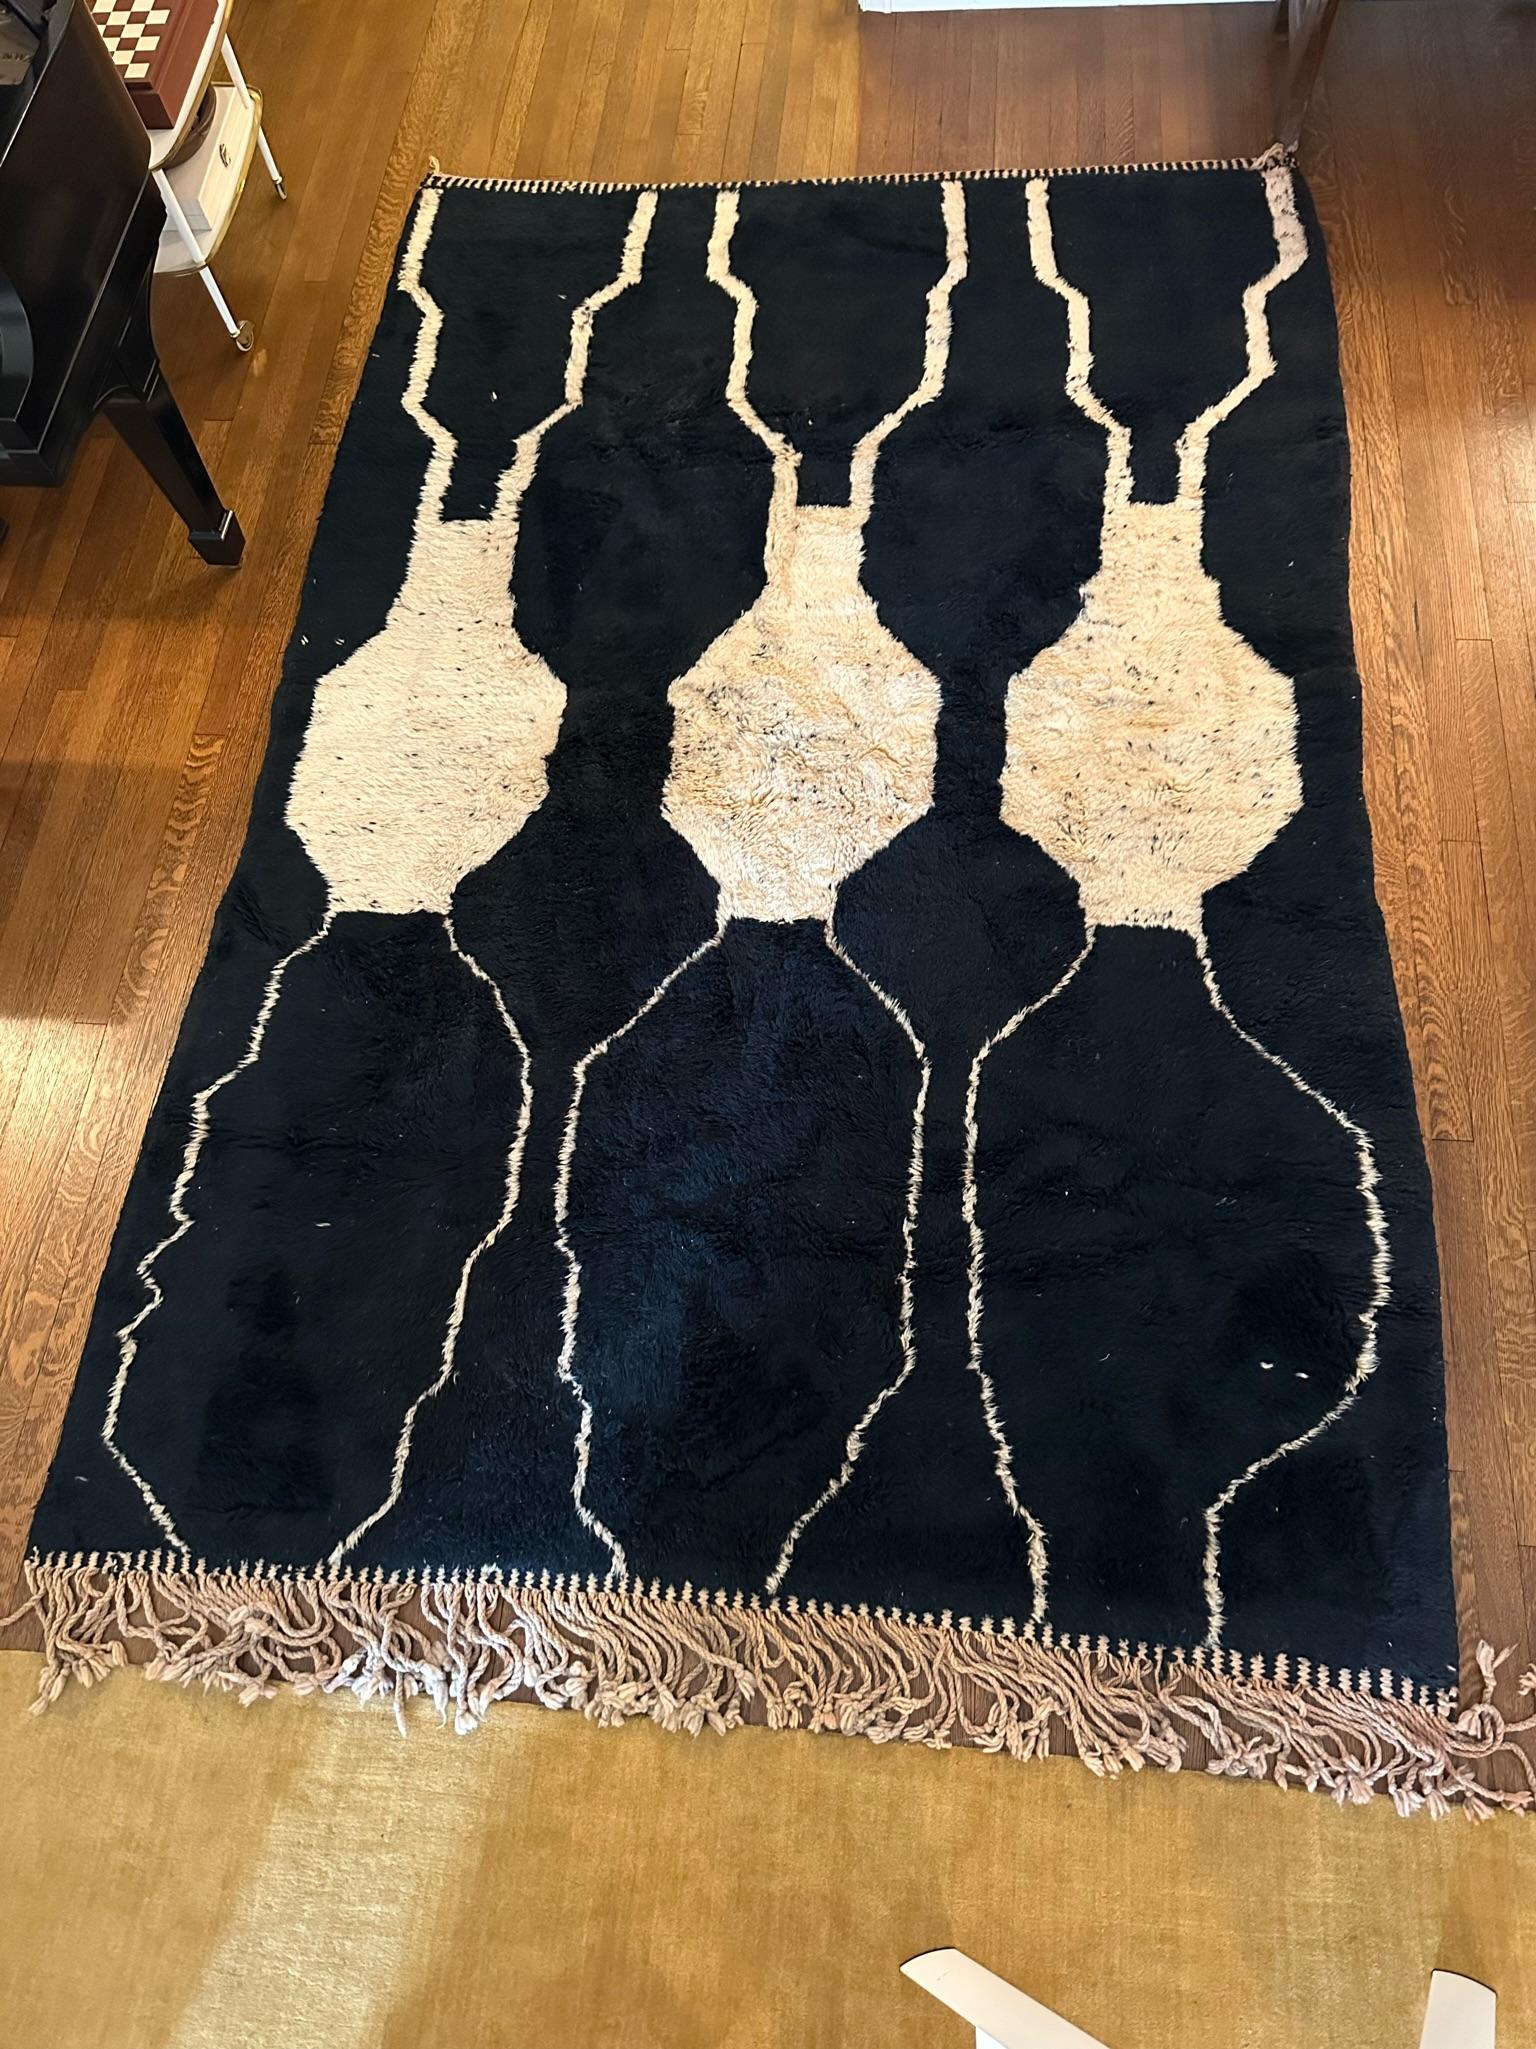 Handwoven Moroccan rug purchased from a local artisan in Morocco. The eclectic pattern and contrasting colors add a unique touch to this beautiful piece. The rug has two binded edges and two frayed edges.